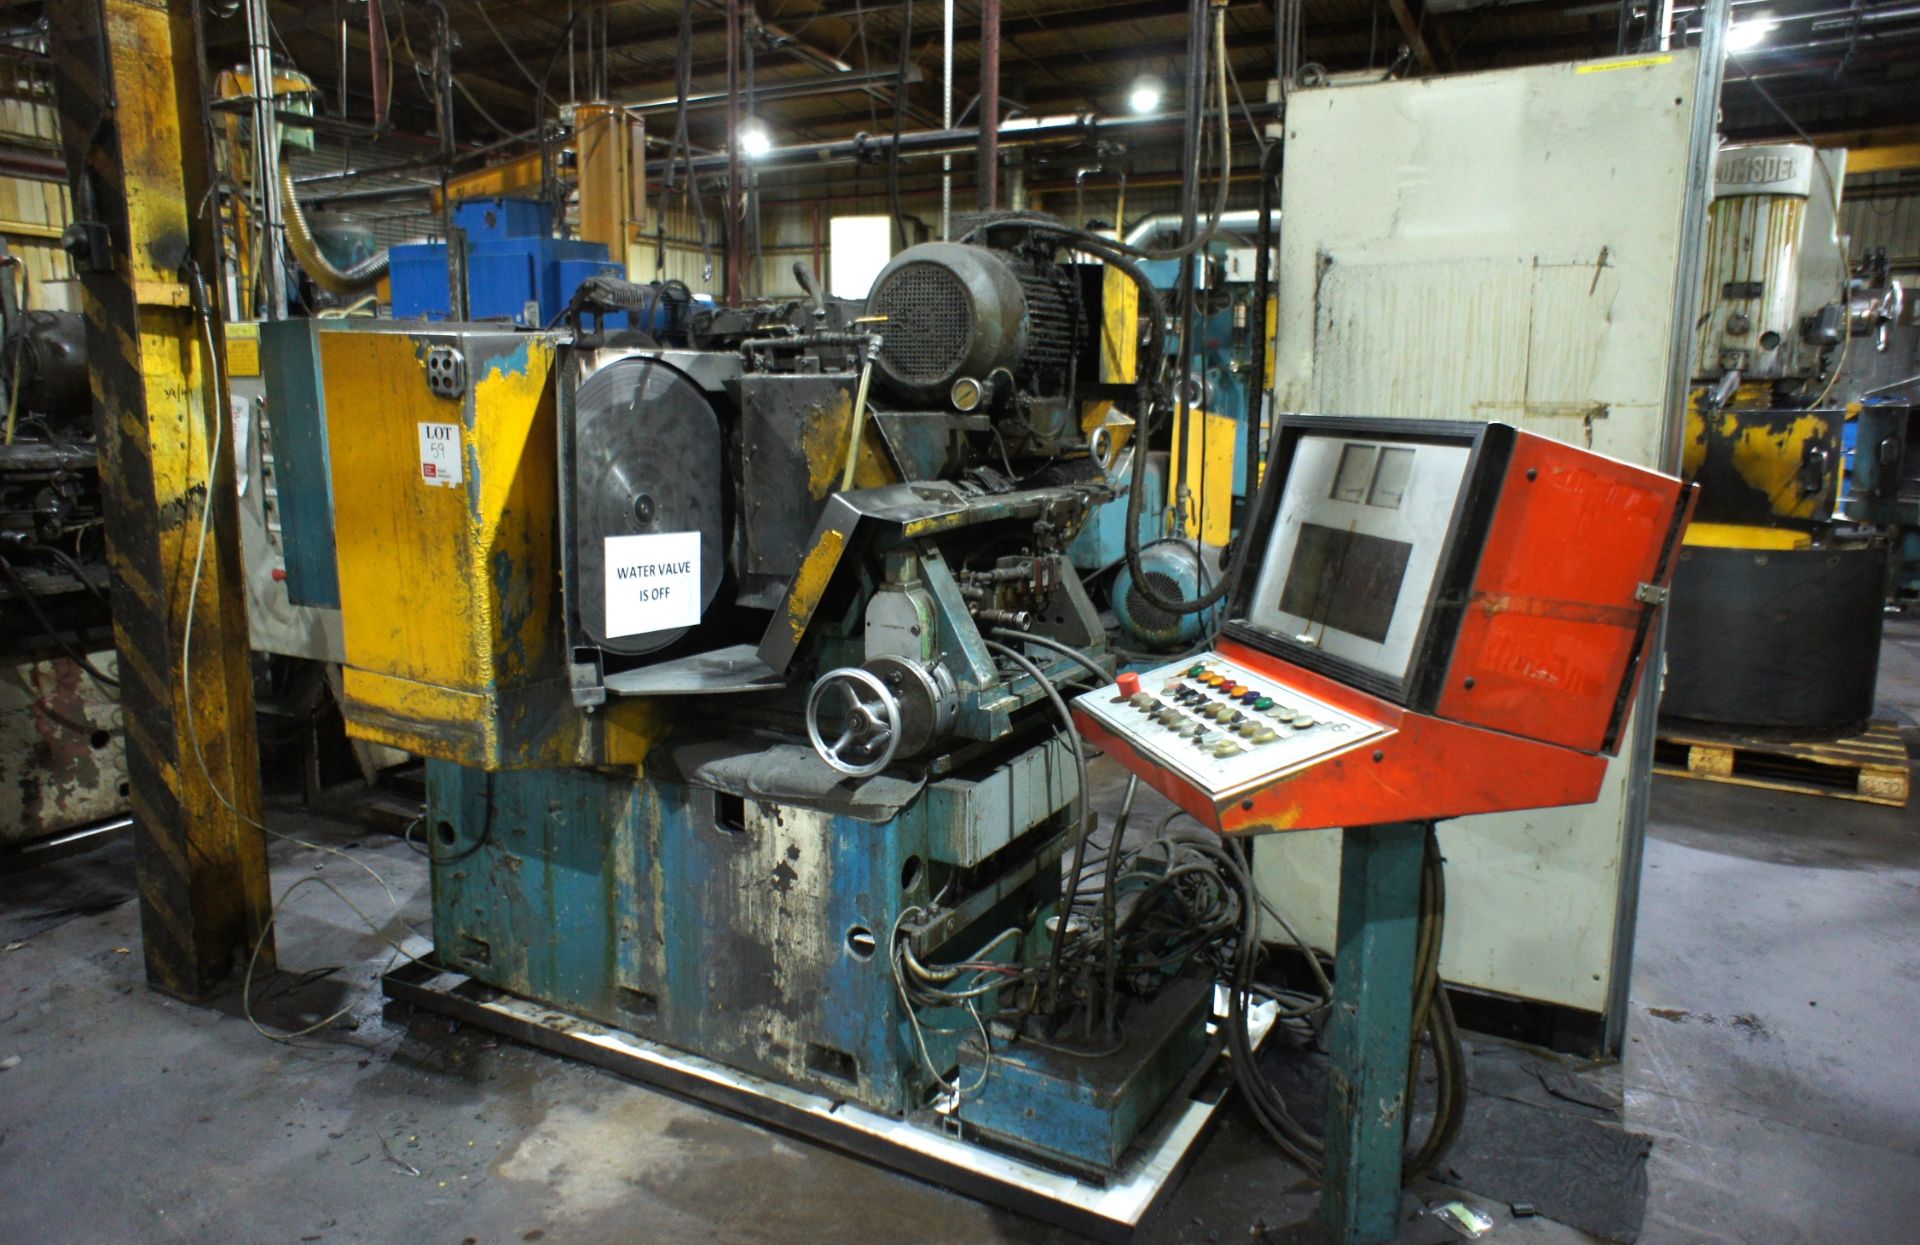 Englander & Beyer rotary surface grinder, Serial no. 583-255 with 25" magnetic chuck, tilt +/-5° (